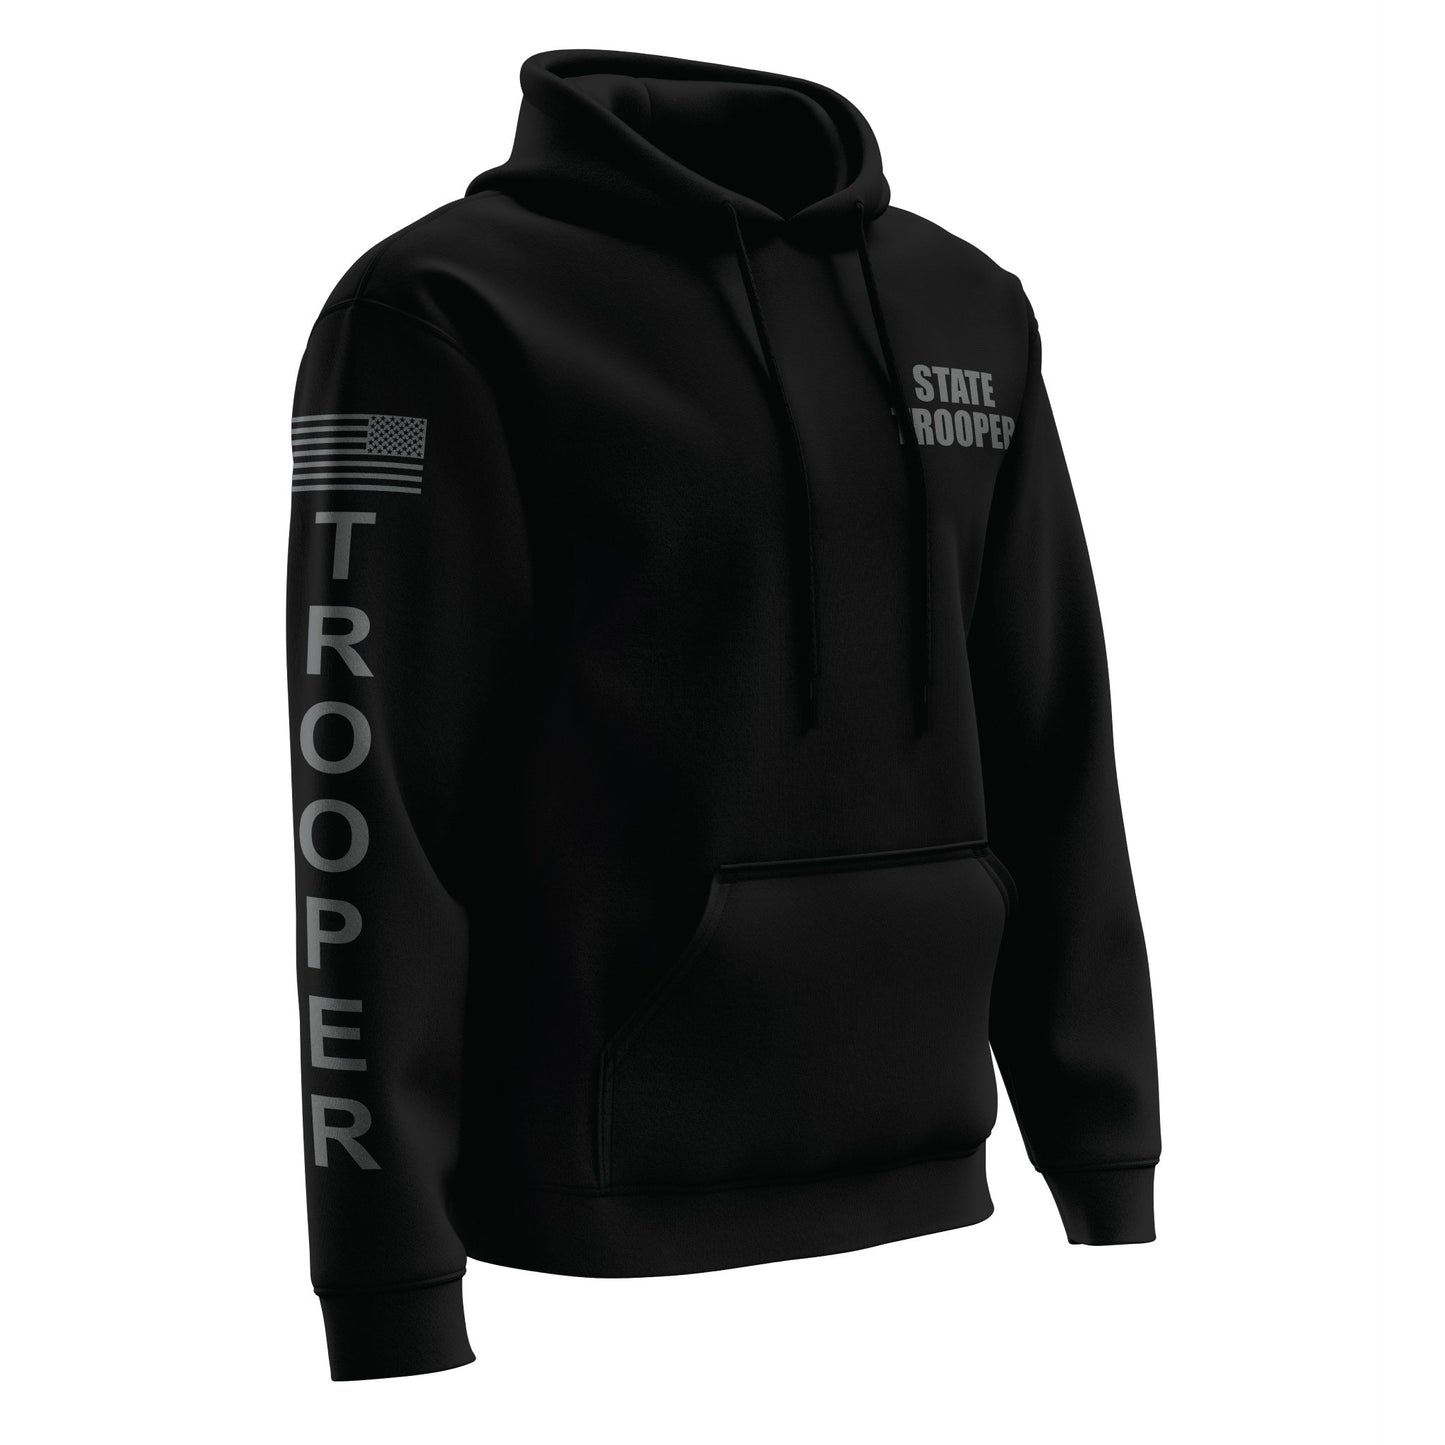 [STATE TROOPER] Performance Hoodie 2.0 [BLK/GRY]-13 Fifty Apparel